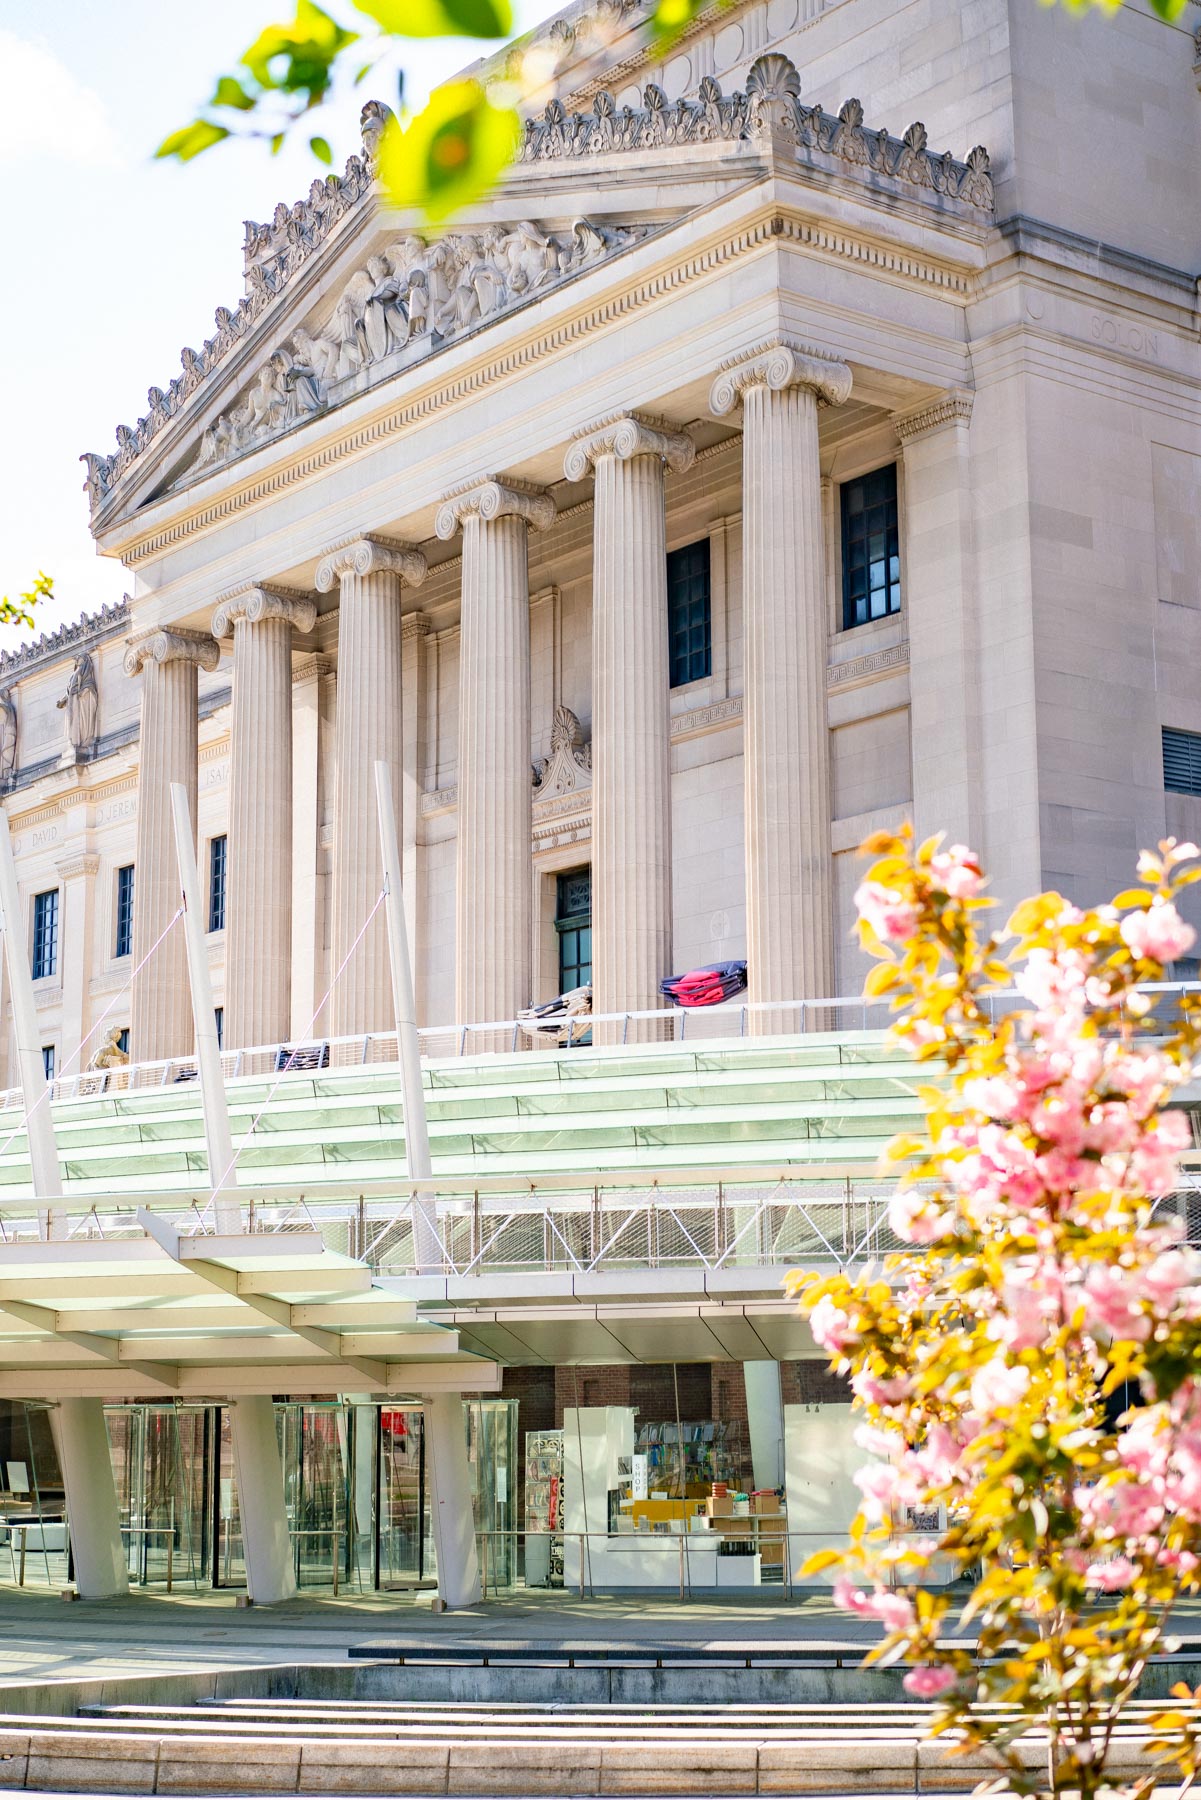 Exterior shot of the Brooklyn Museum is made with intricately carved architecture and large stone pillars surrounded by spring blooms and glass windows.